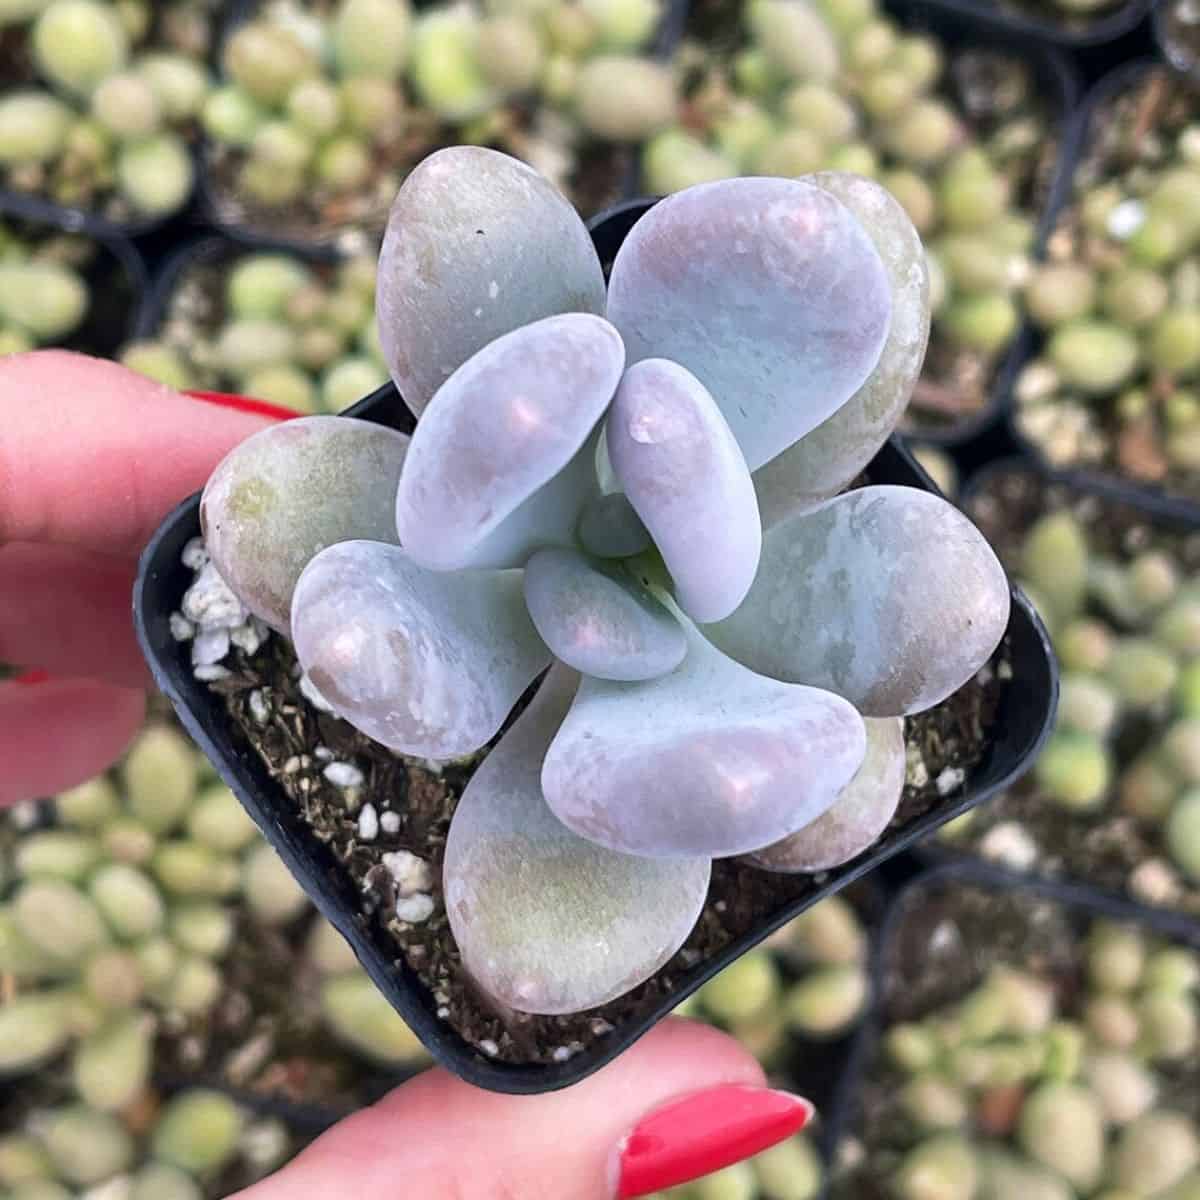 Pachyphytum oviferum grows in a small plastic pot held by hand.